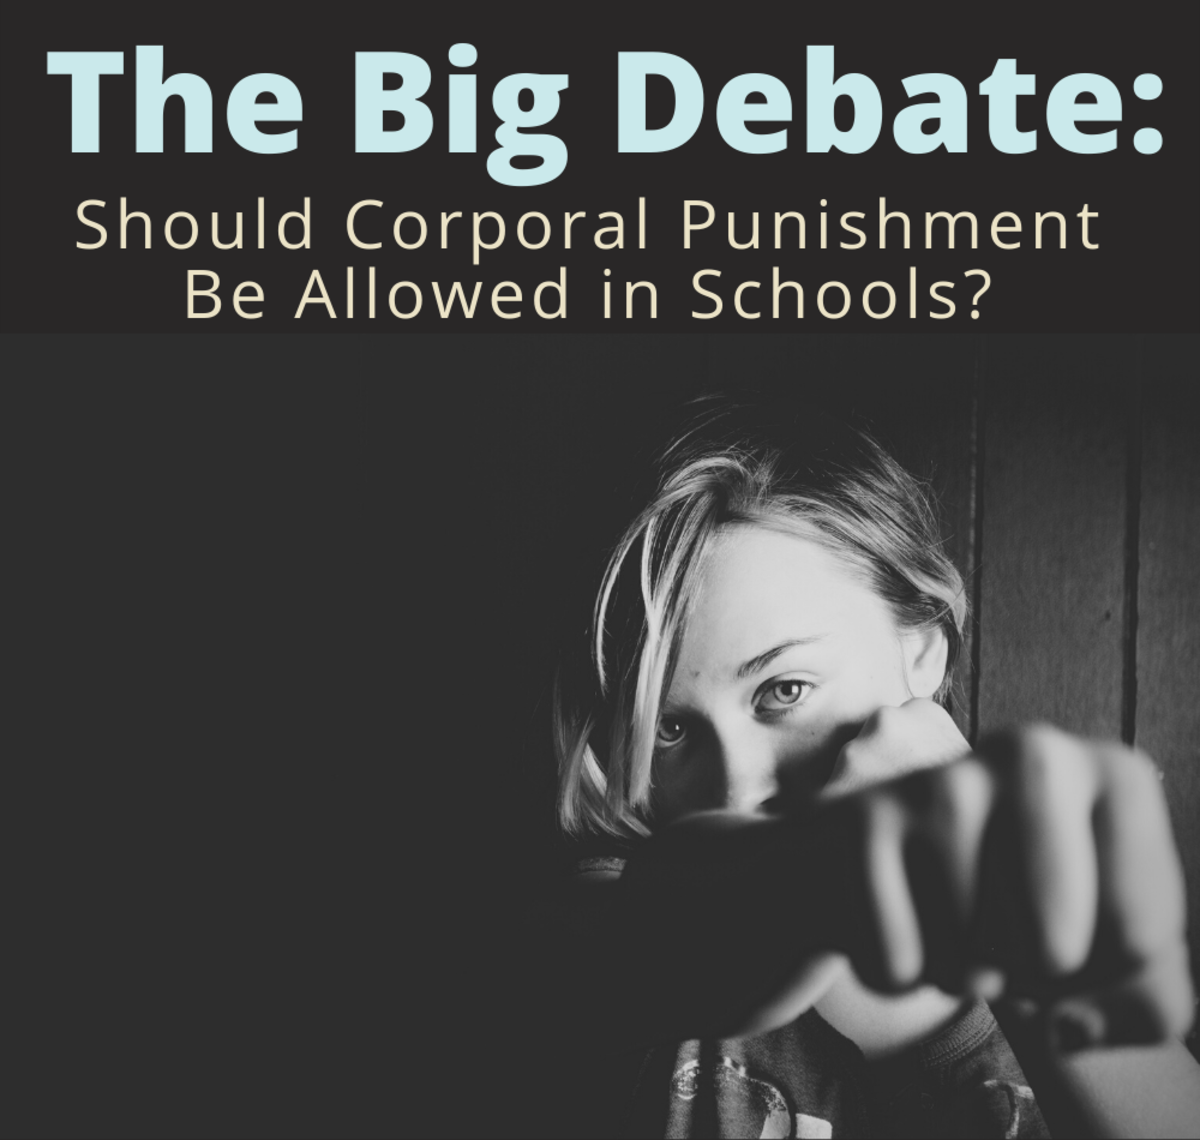 Arguments For and Against the Use of Corporal Punishment in Schools